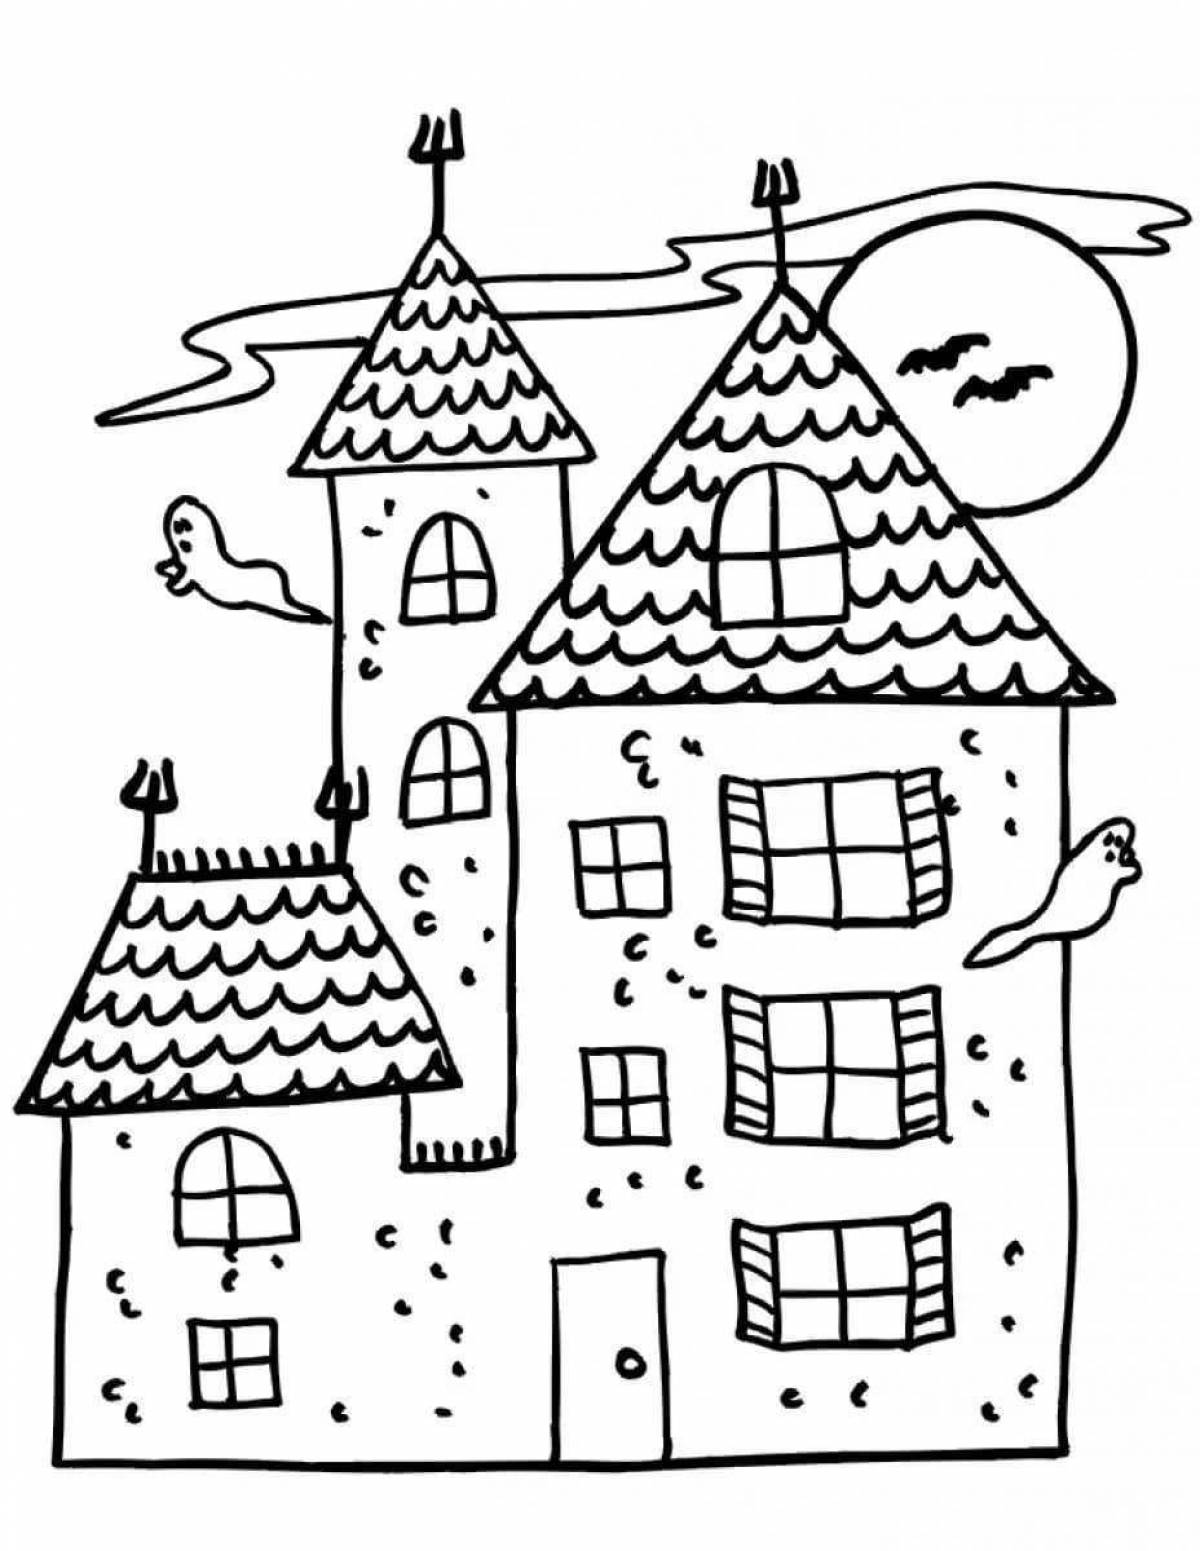 Coloring pages wonderful houses for children 5-6 years old